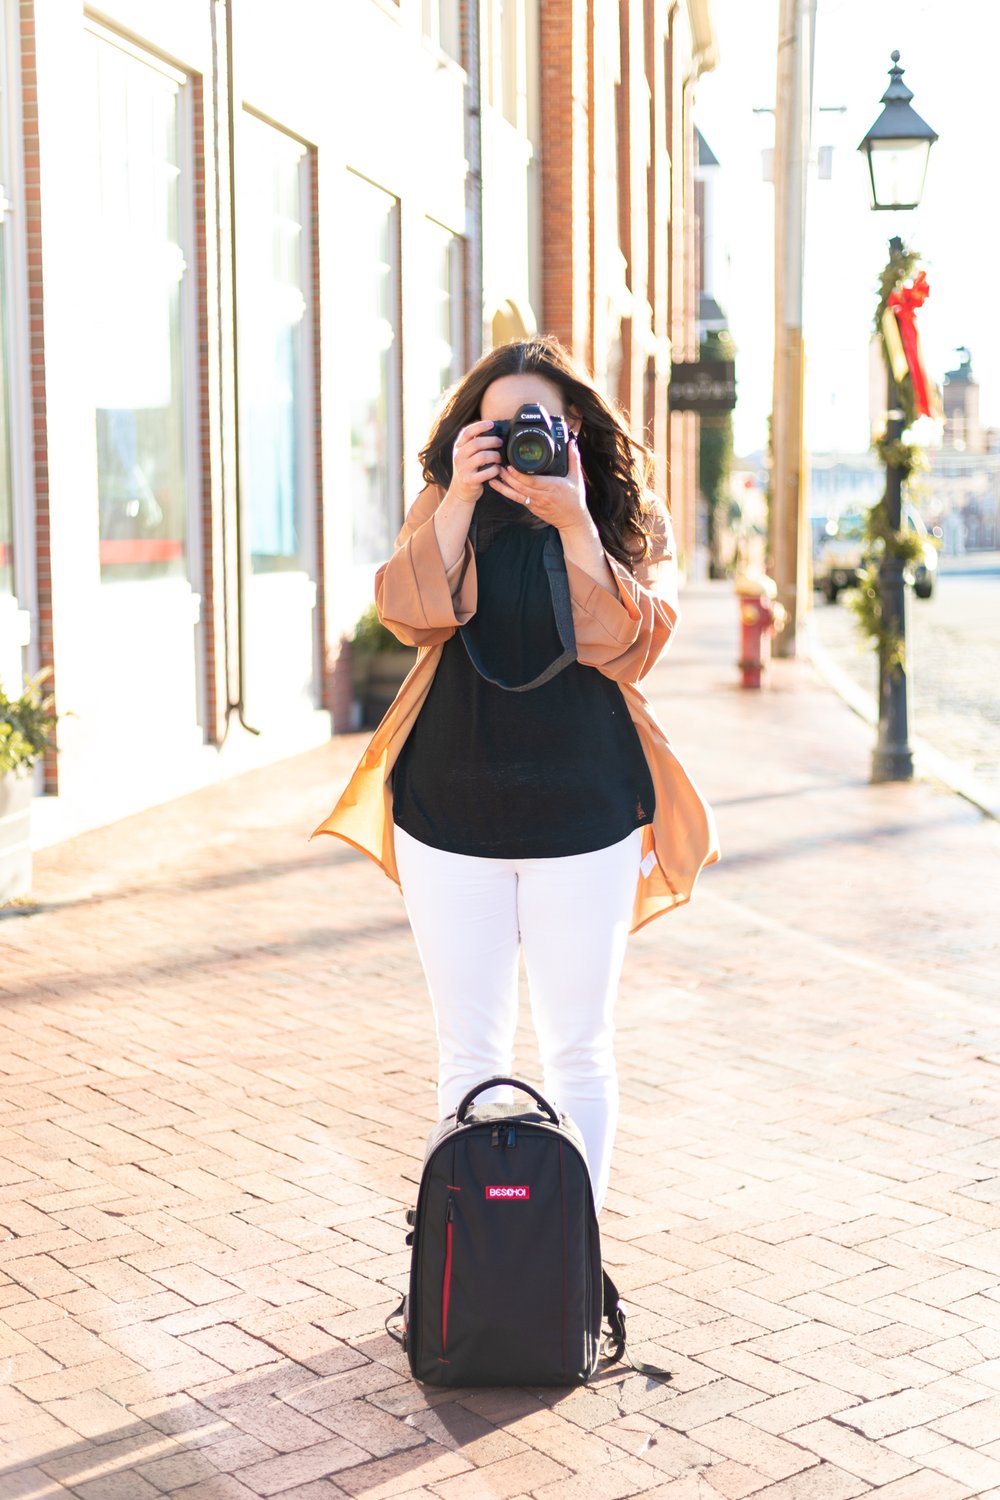 Brand photographer for family and wedding photographers in Charleston, South Carolina.